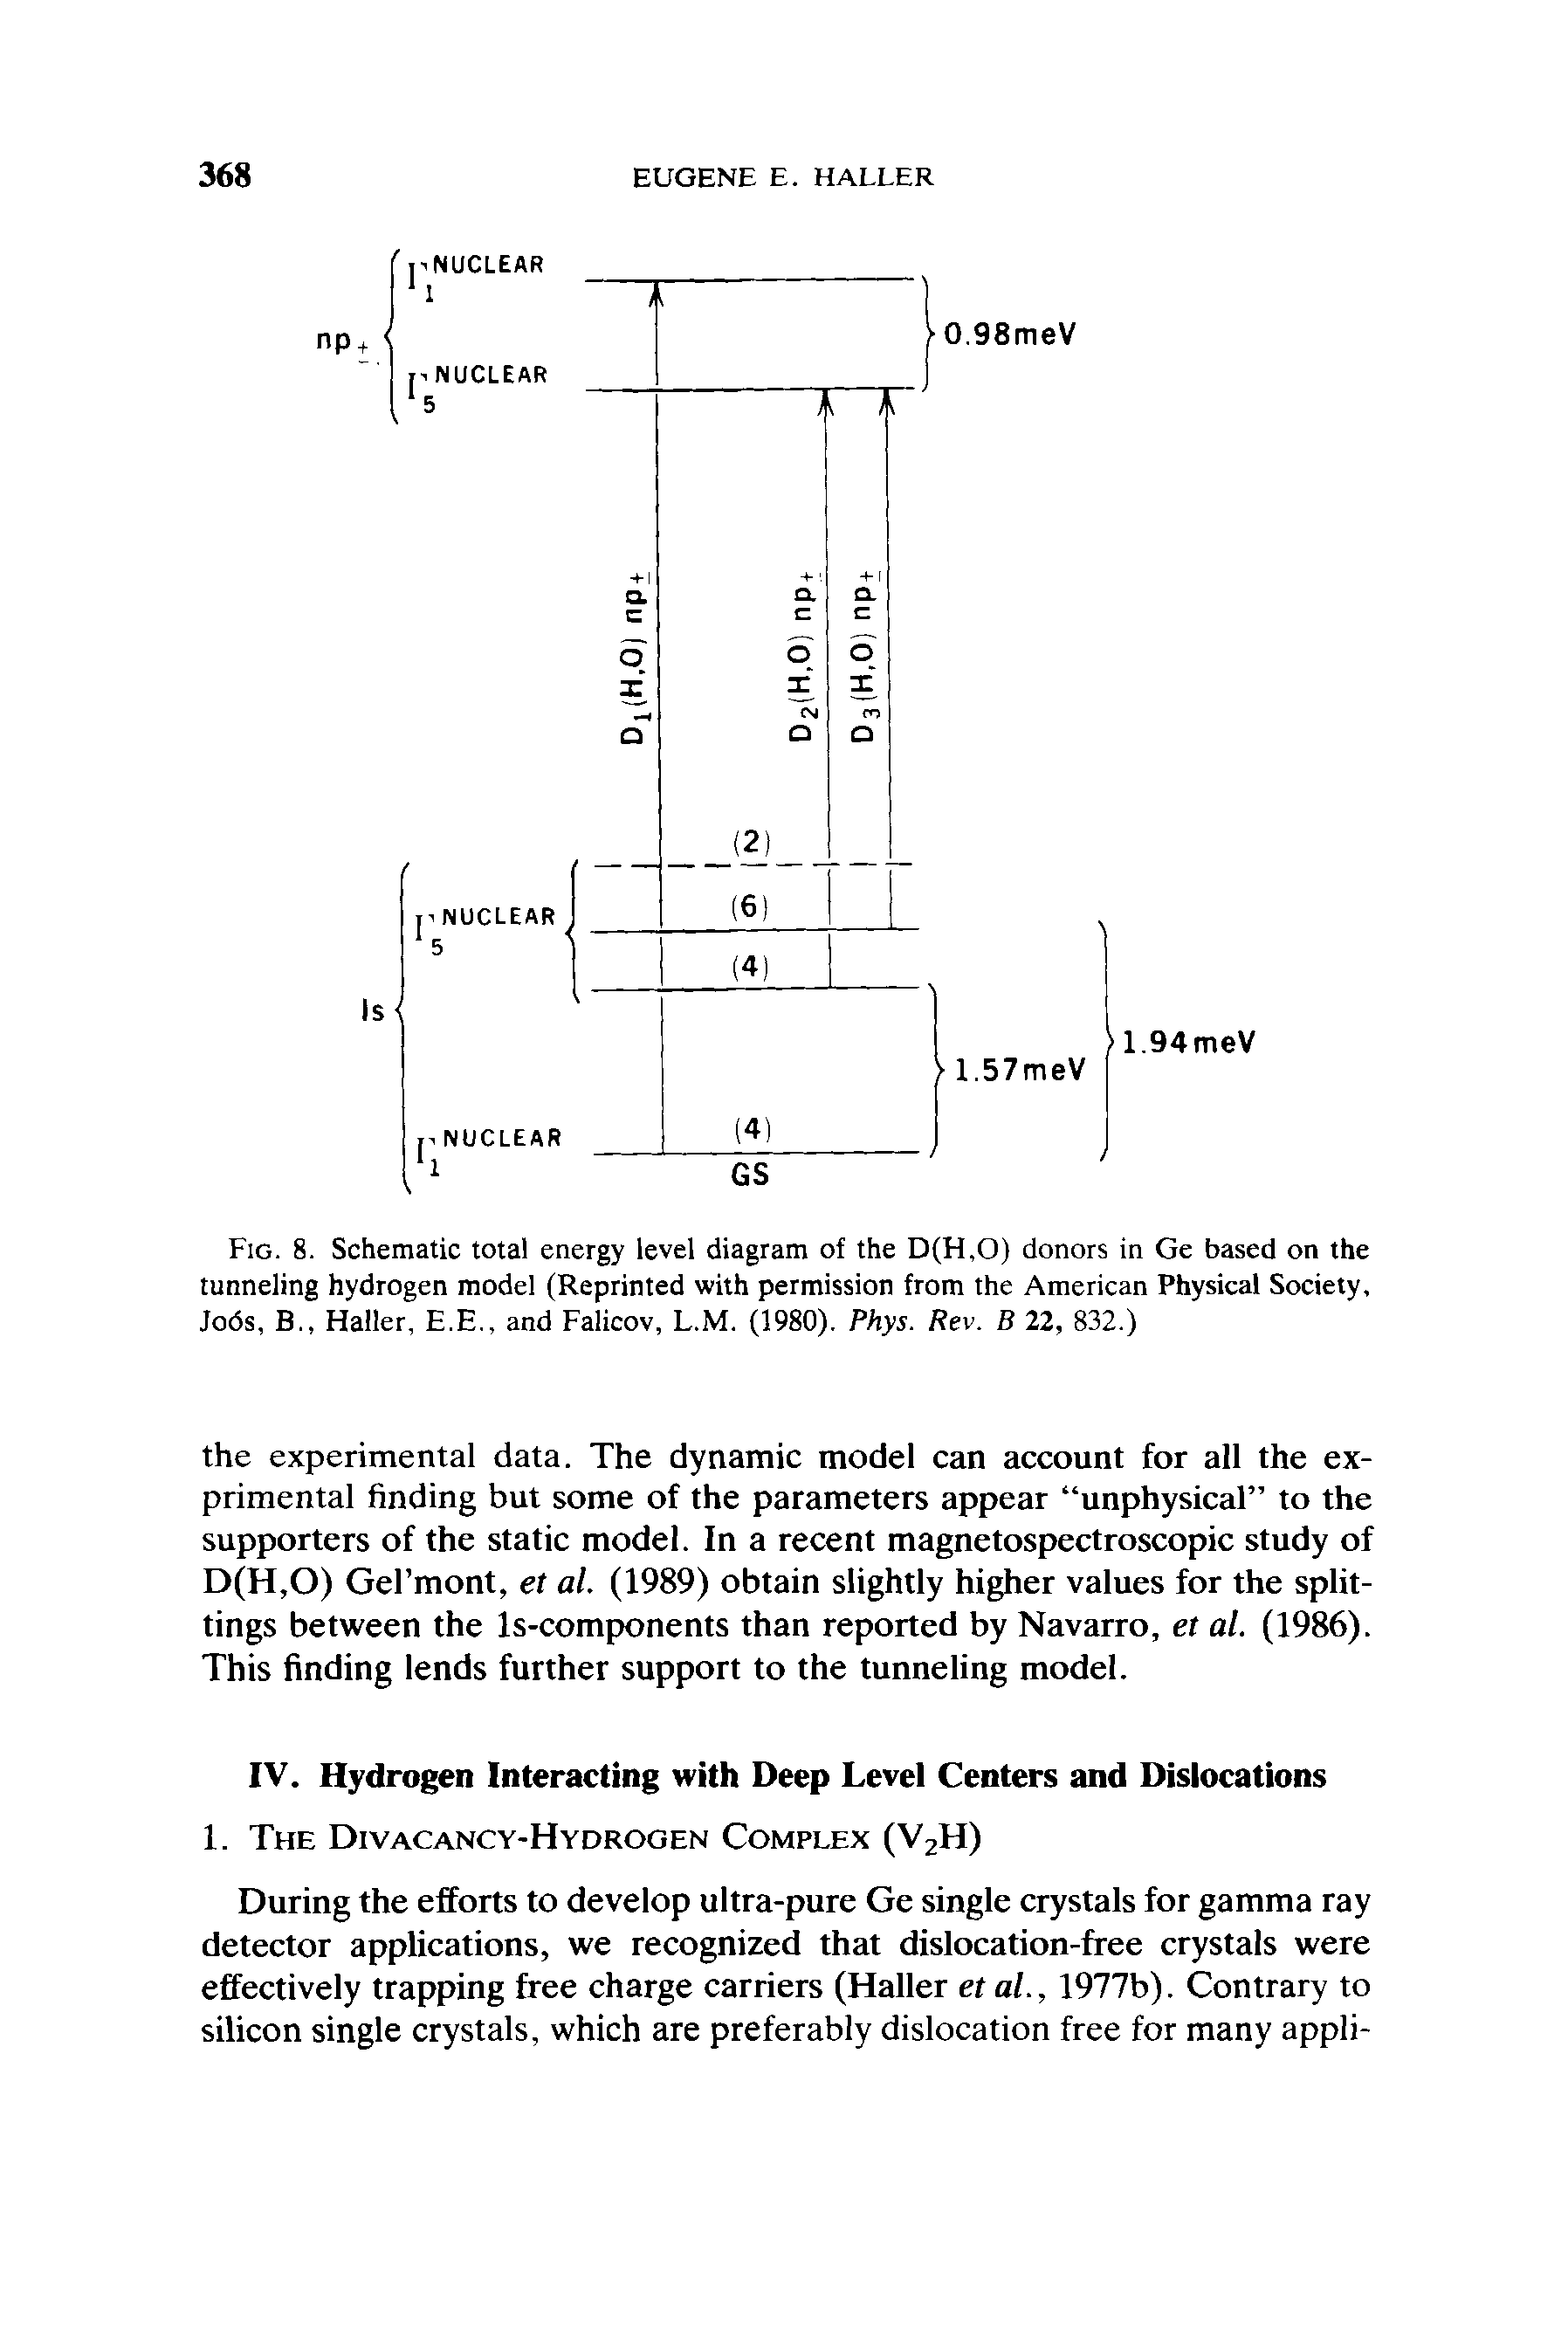 Fig. 8. Schematic total energy level diagram of the D(H,0) donors in Ge based on the tunneling hydrogen model (Reprinted with permission from the American Physical Society, Jobs, B., Haller, E.E., and Falicov, L.M. (1980). Phys. Rev. B 22, 832.)...